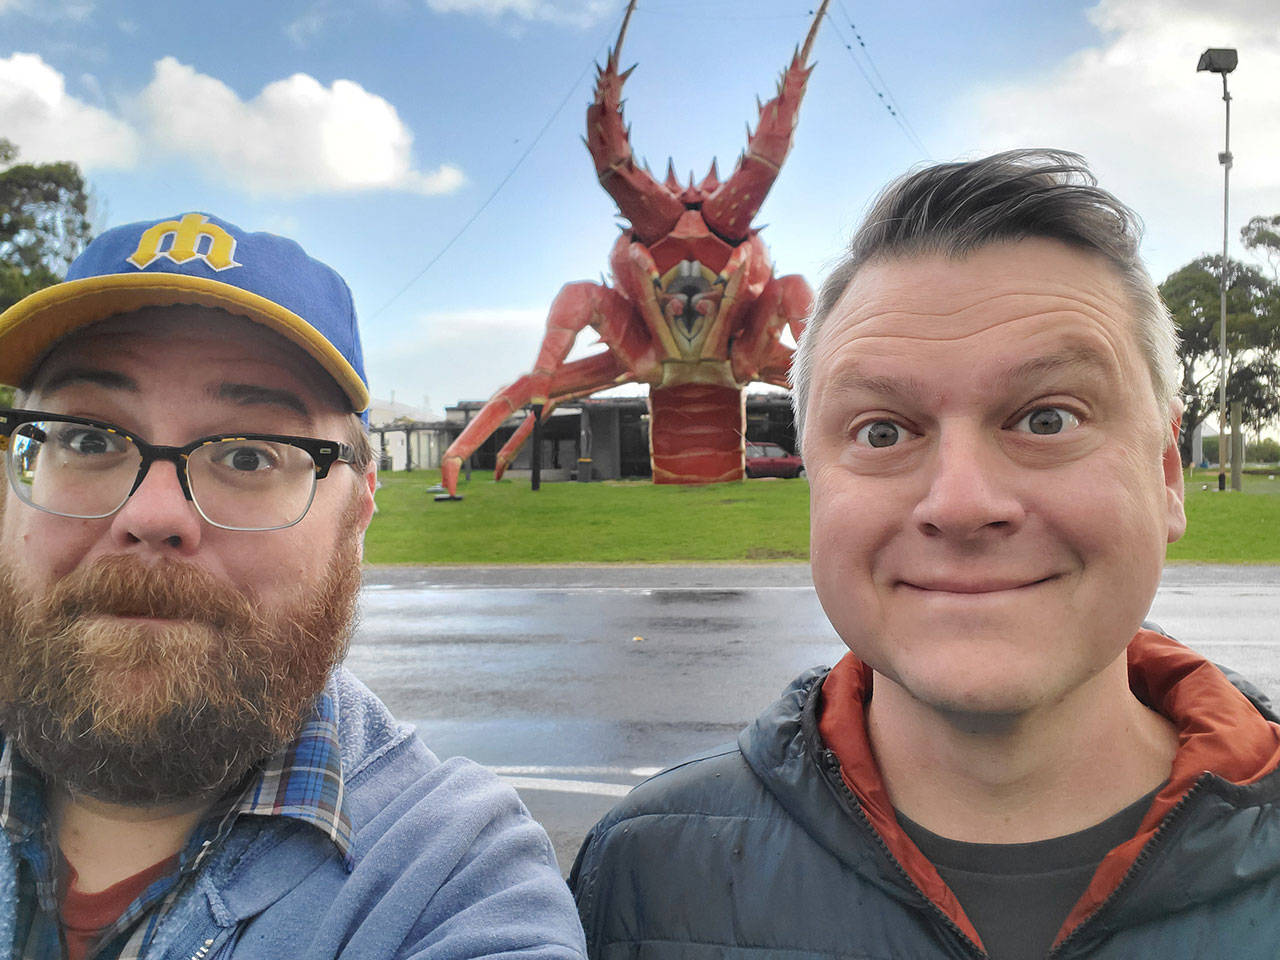 Andrew Walsh, left, and Luke Burbank, hosts of the podcast “Too Beautiful to Live,” visit “Larry the Lobster” in Kingston SE, Australia, during one of their latest adventures. The podcast is nearing its 3,000th episode and will be featured live during Thing at Fort Worden on Aug. 24 at the Wheeler Theater, where Walsh got married. (American Public Media)